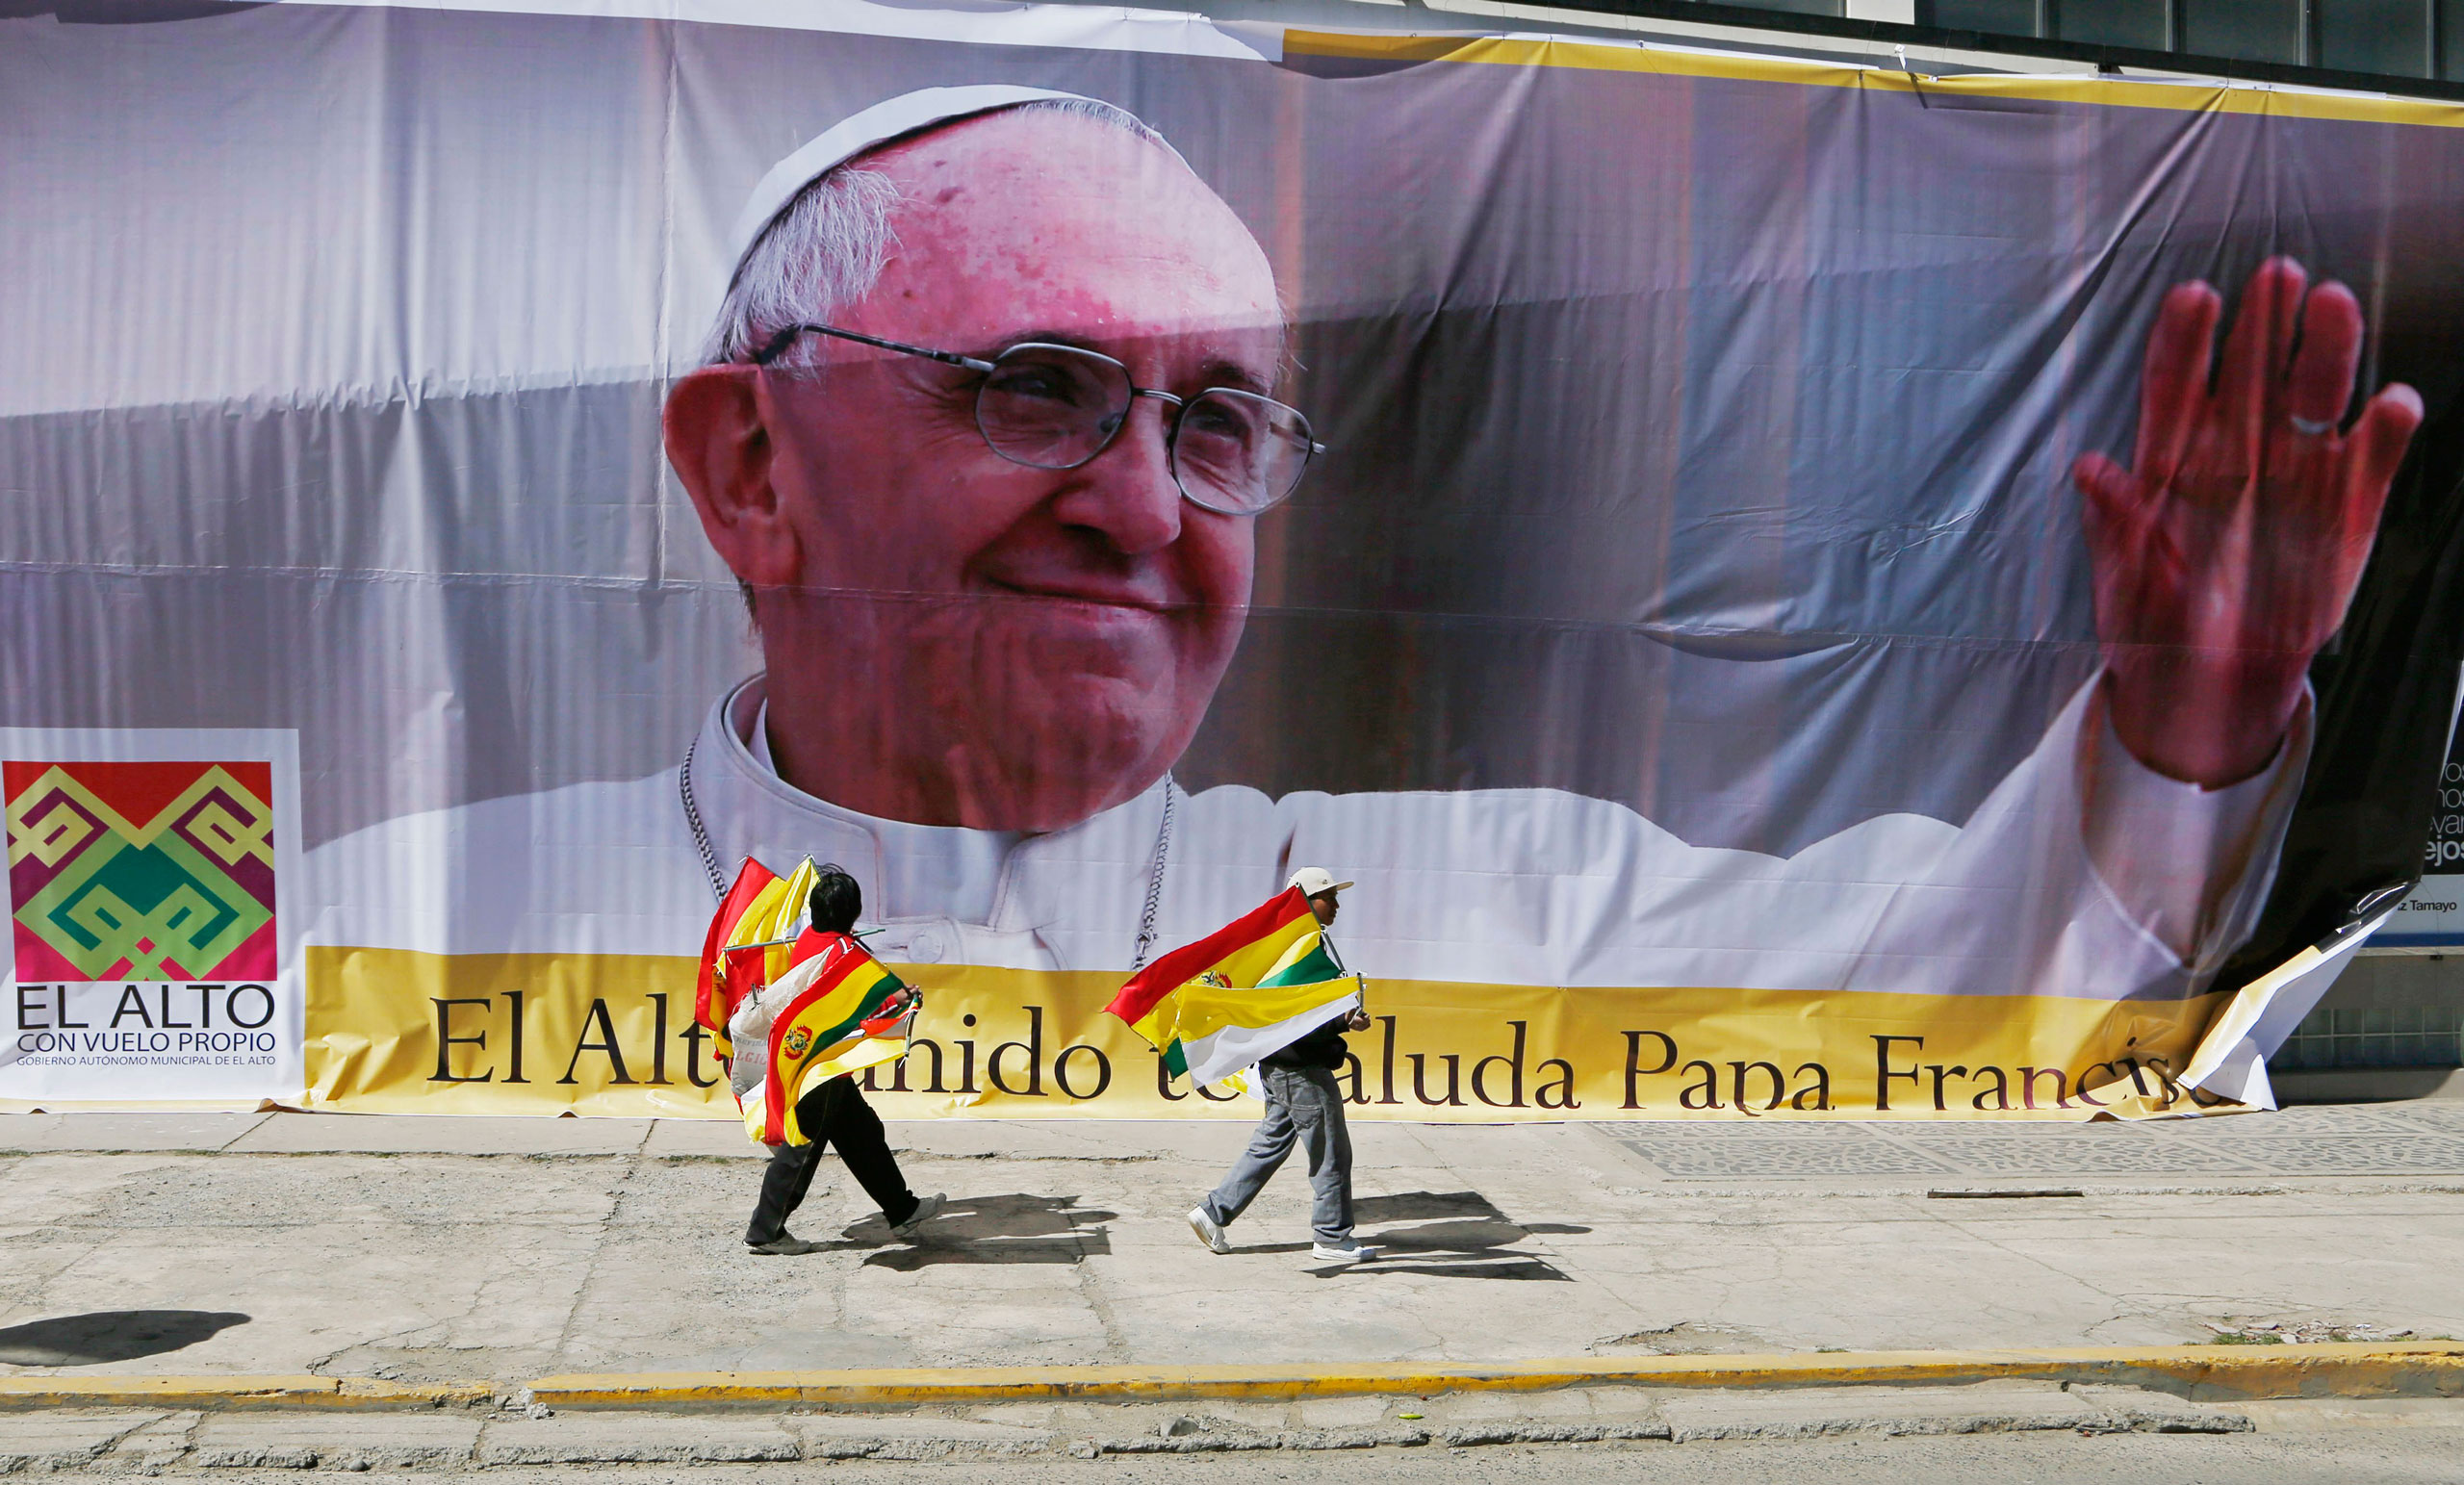 Street vendors selling Bolivian and Vatican flags pass a large image of Pope Francis ahead of the Pope's arrival to El Alto, Bolivia, on July 8, 2015.